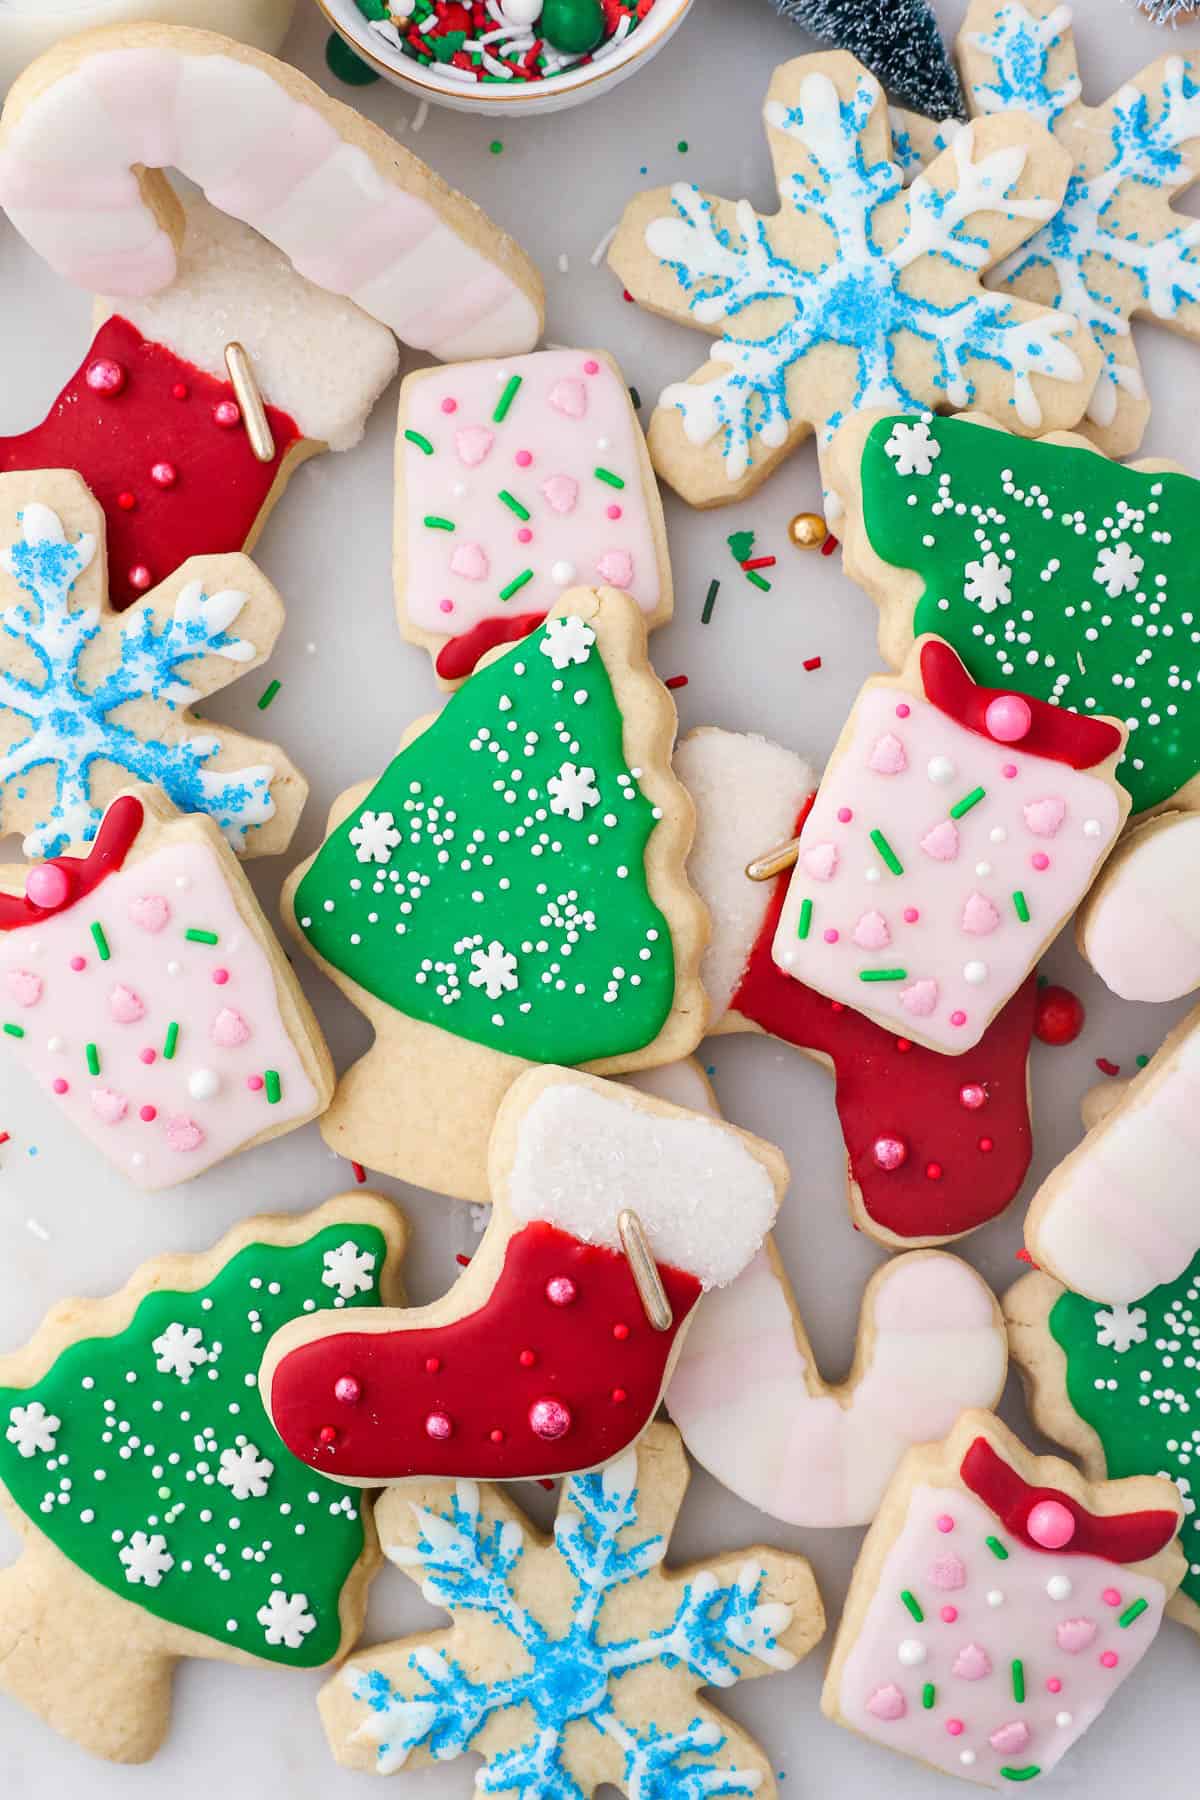 Easy Icing for Sugar Cookies 